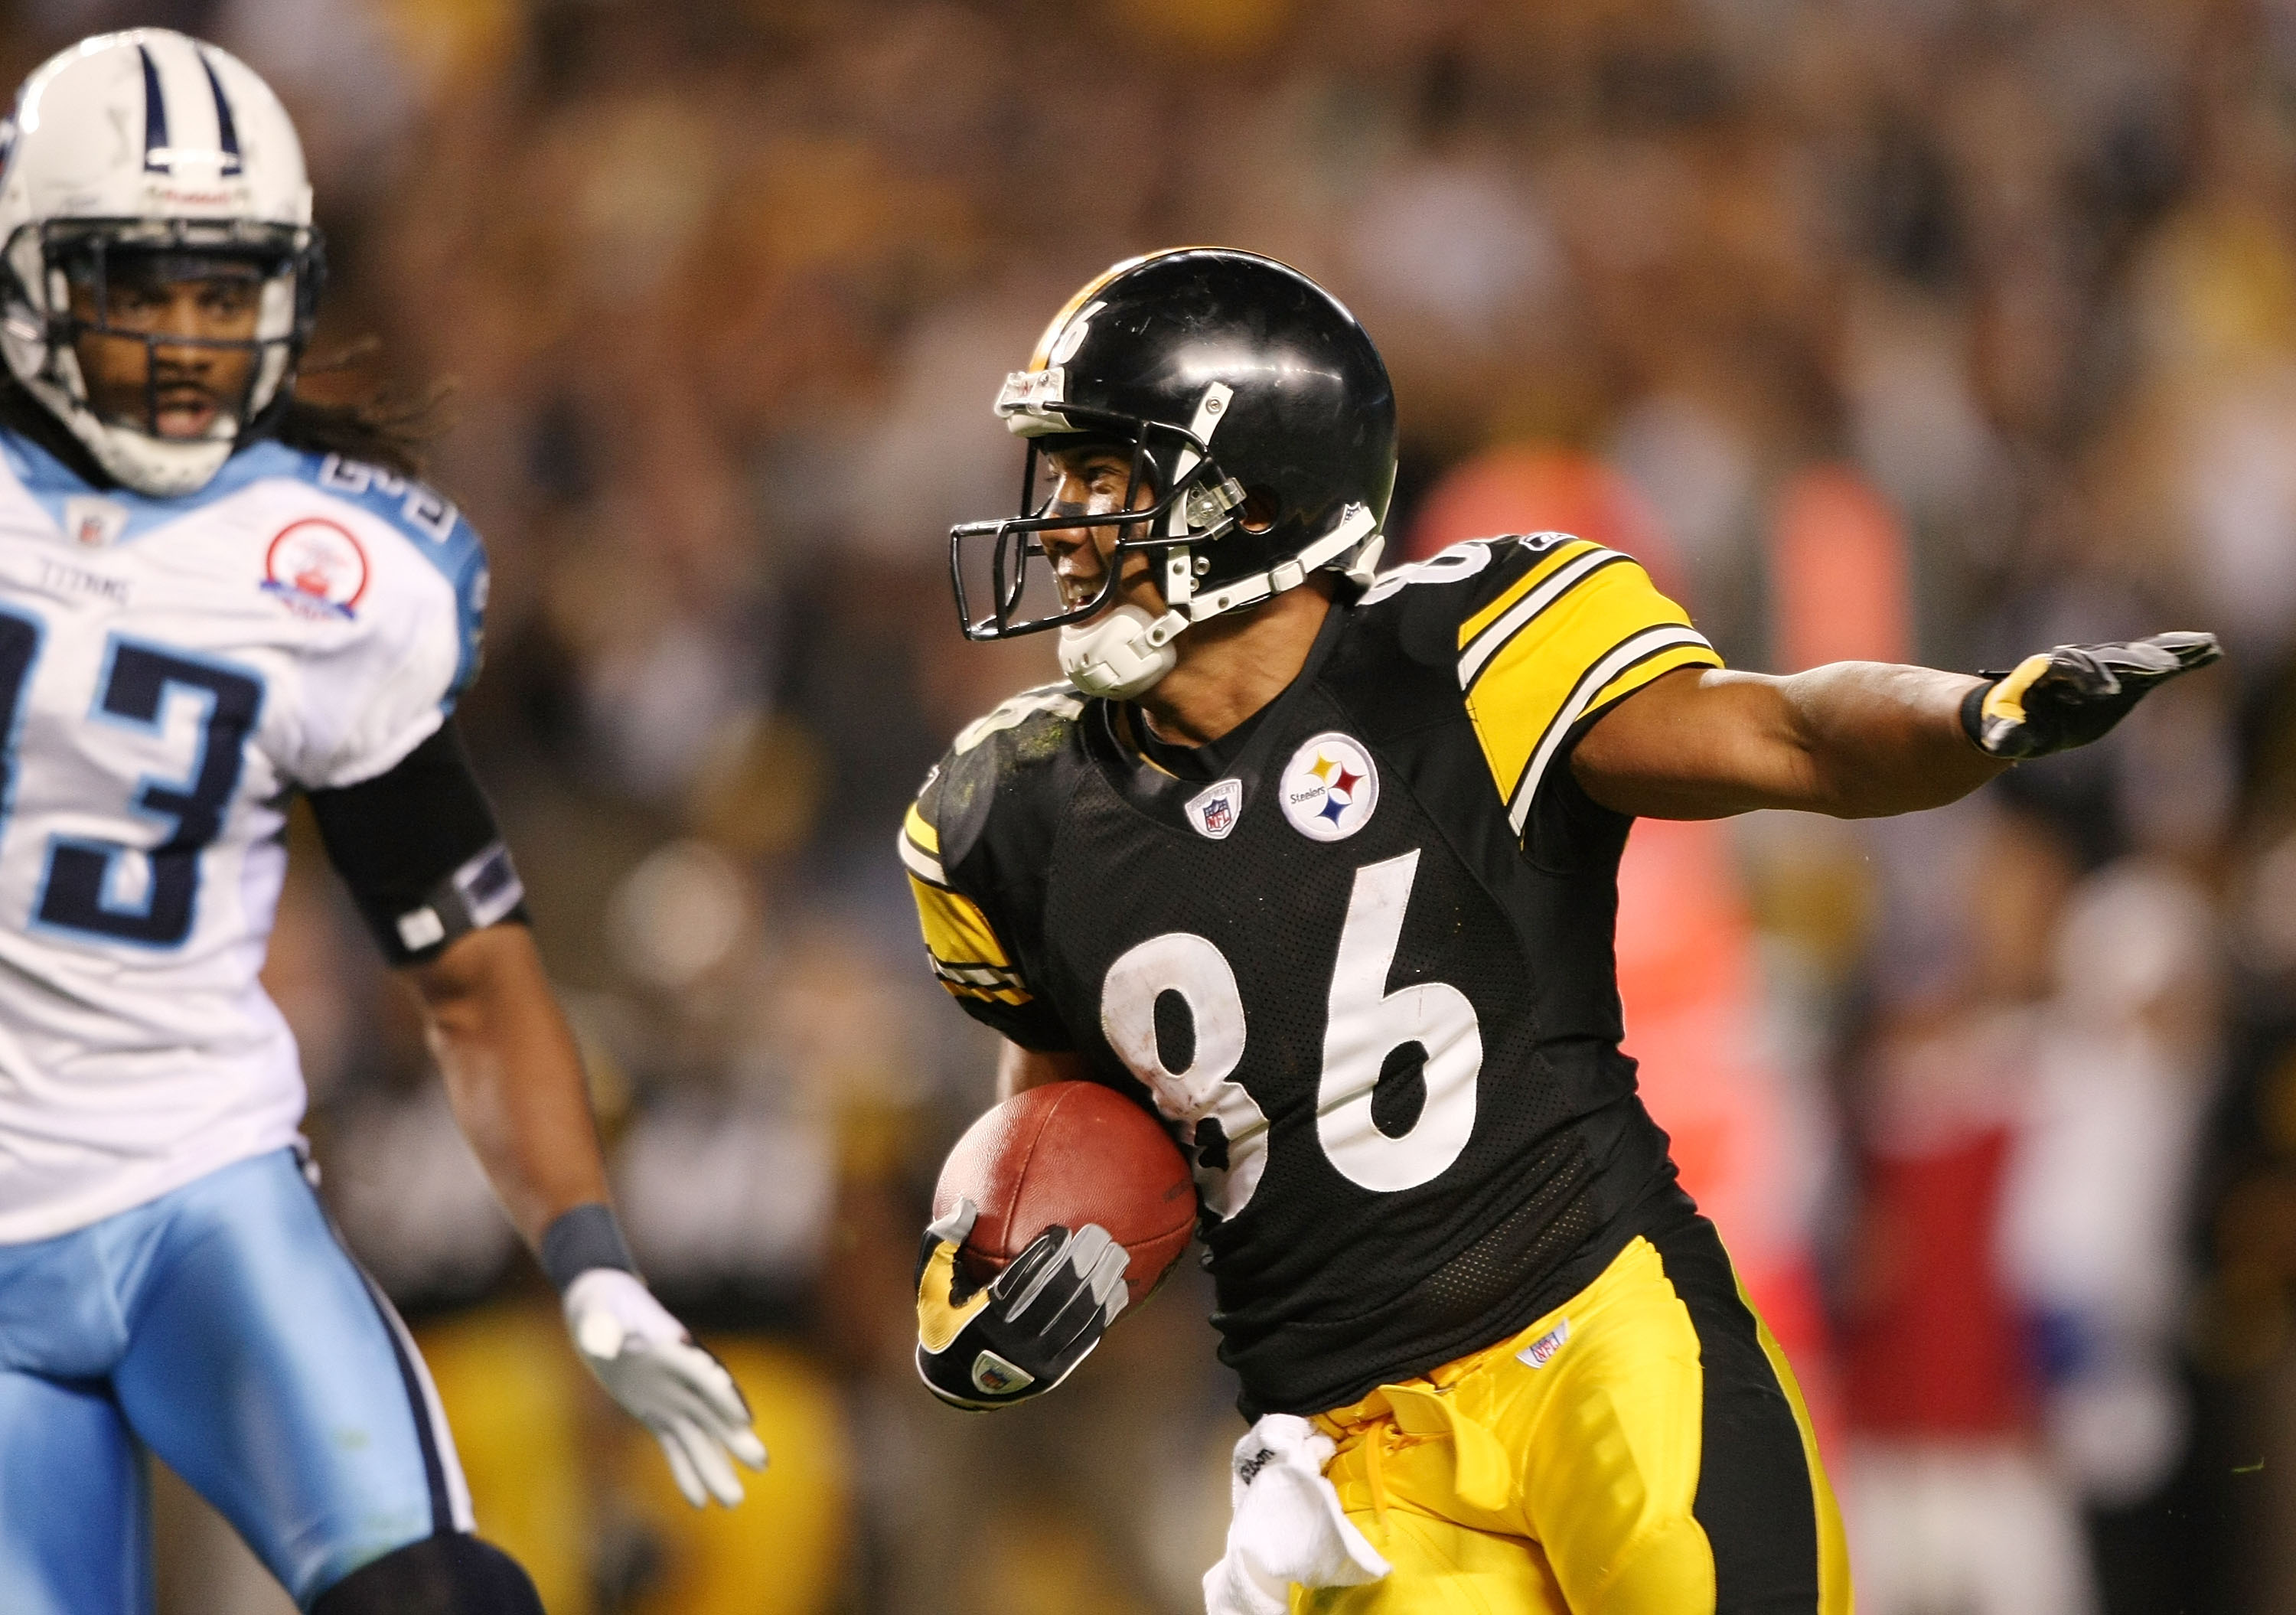 Win over Bucs gives Steelers welcome dose of optimism